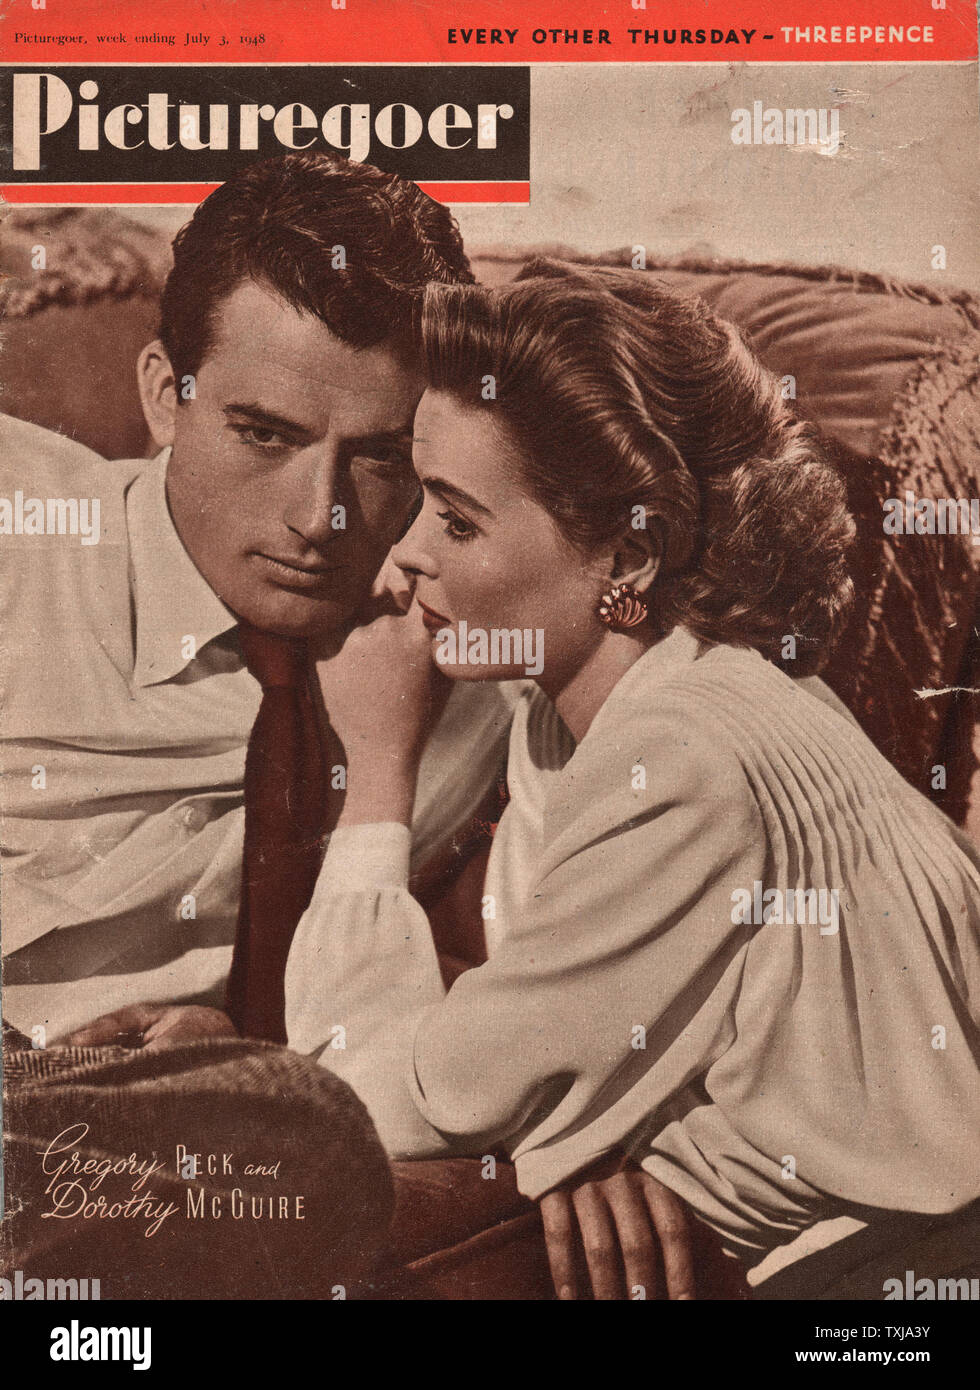 1948 Picturegoer magazine front page actor Gregory Peck and actress Dorothy McGuire Stock Photo